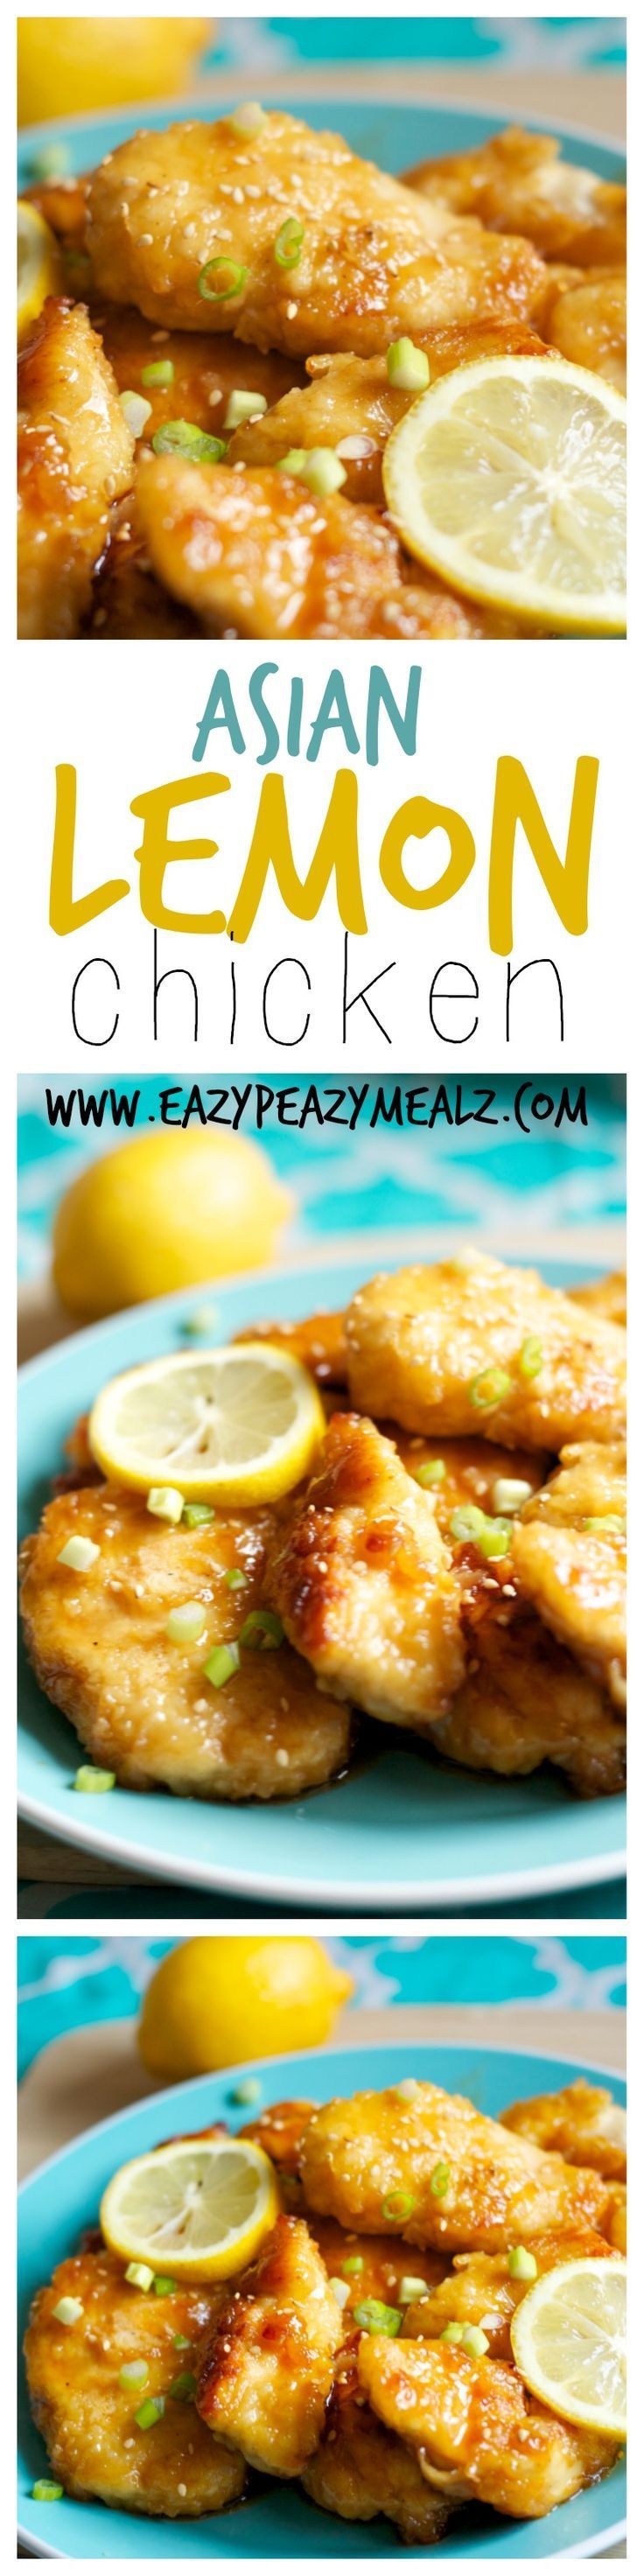 Asian Lemon Chicken: This will become a staple in your dinner rotation. So much flavor, and way better than take-out! – Eazy Peazy